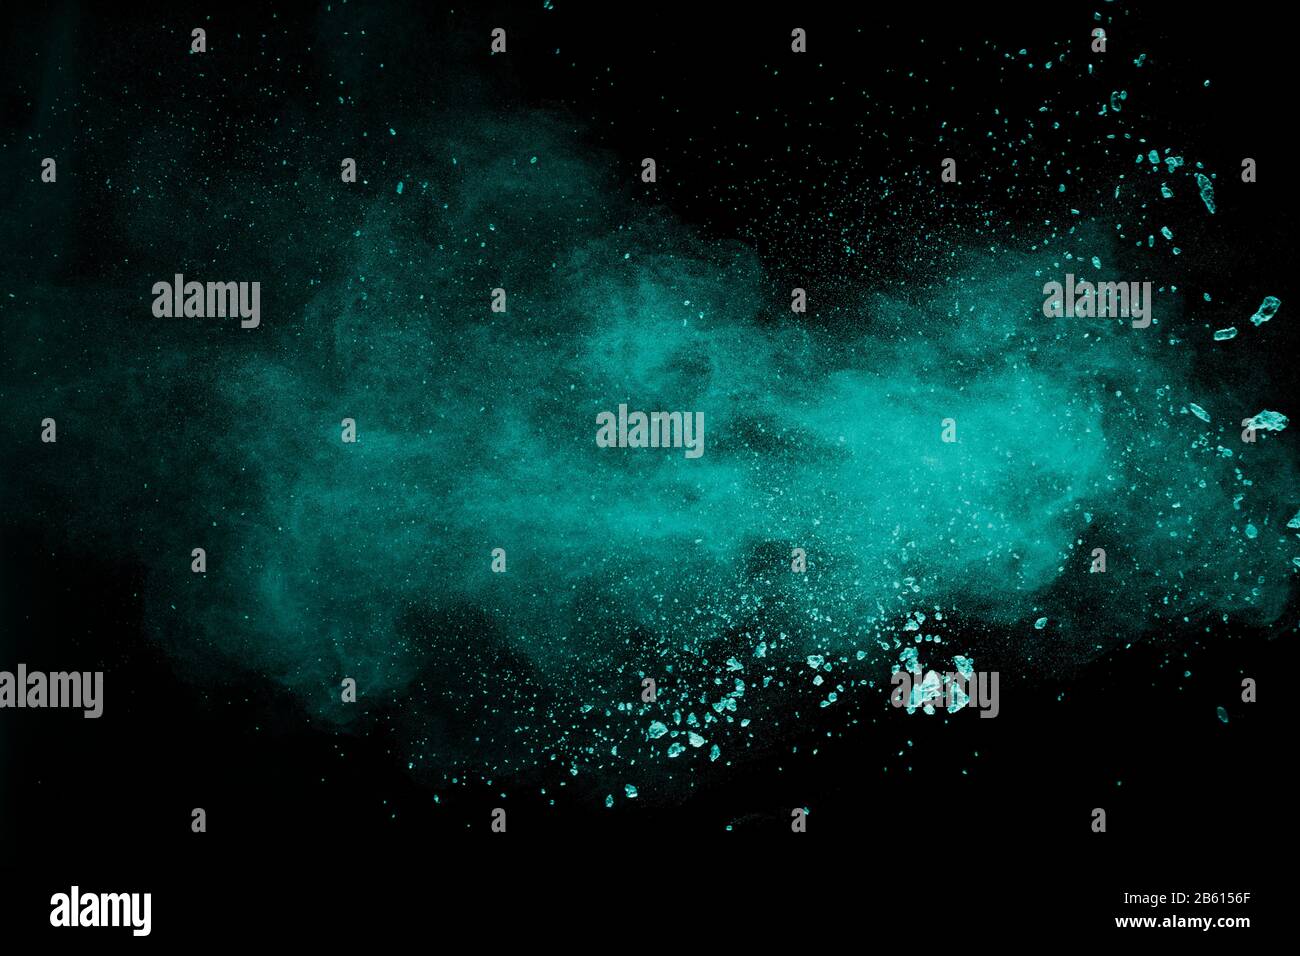 Abstract splash of green colored powder on black background.Green powder explosion. Stock Photo